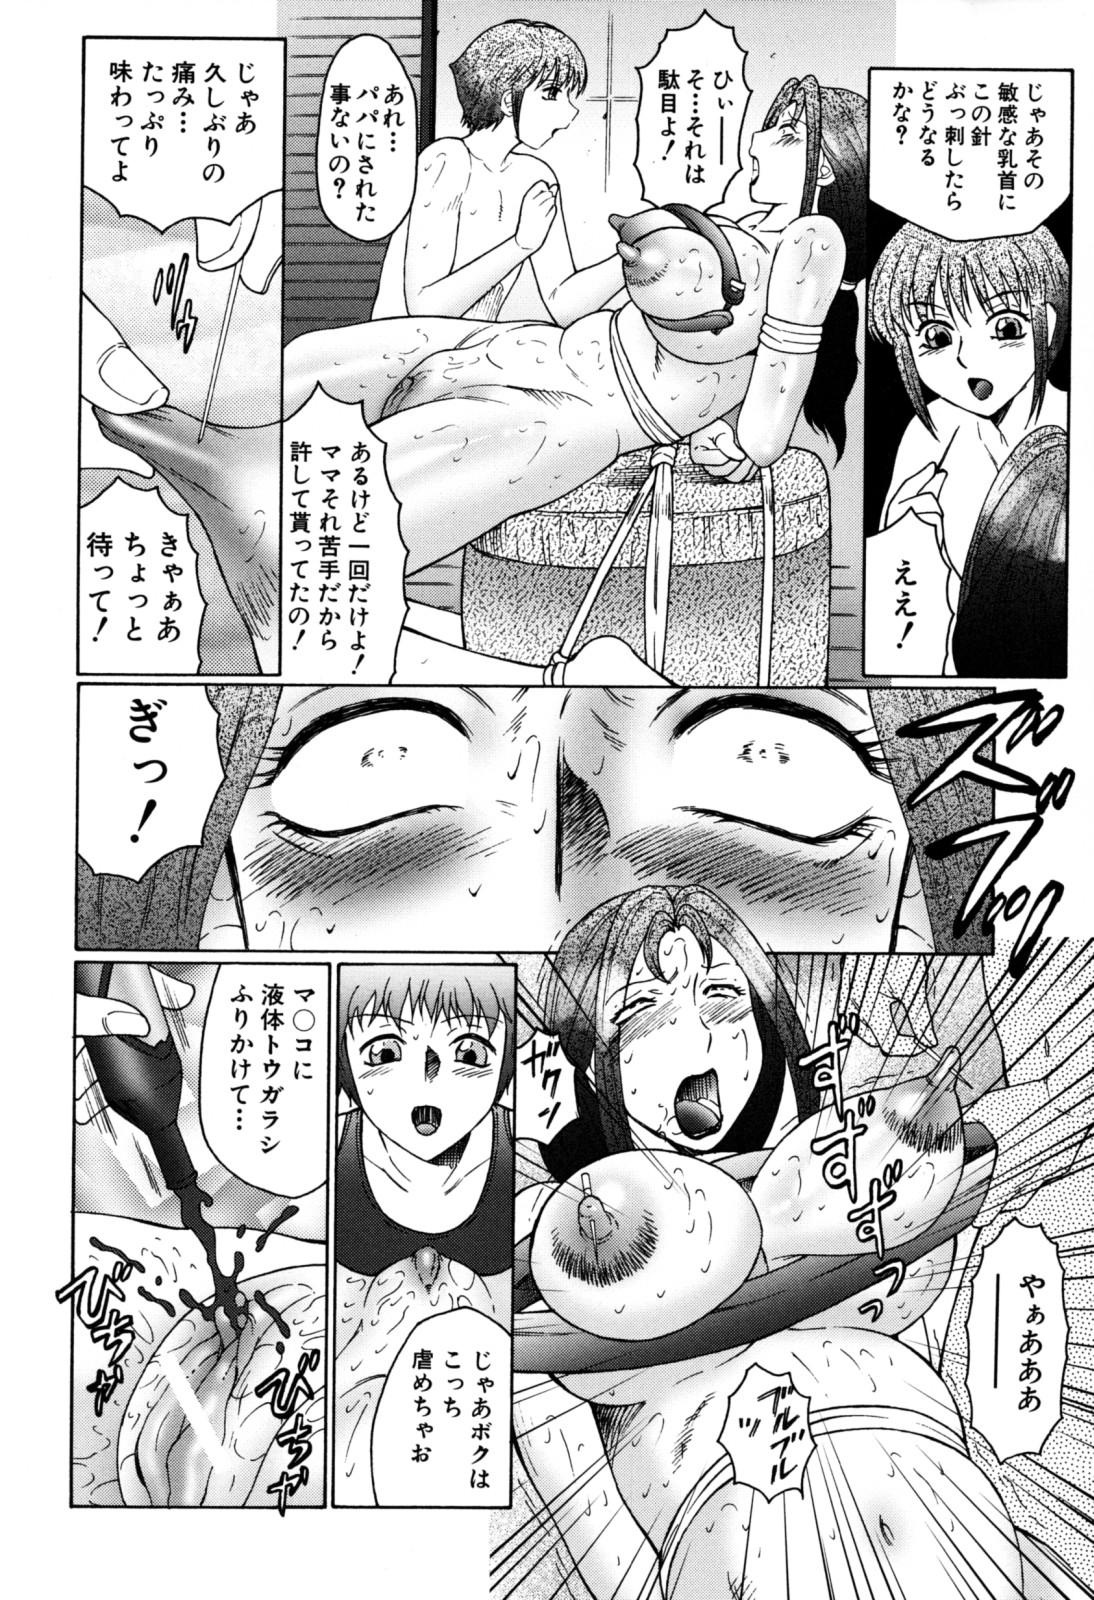 Boshino Toriko - The Captive of Mother and the Son 169